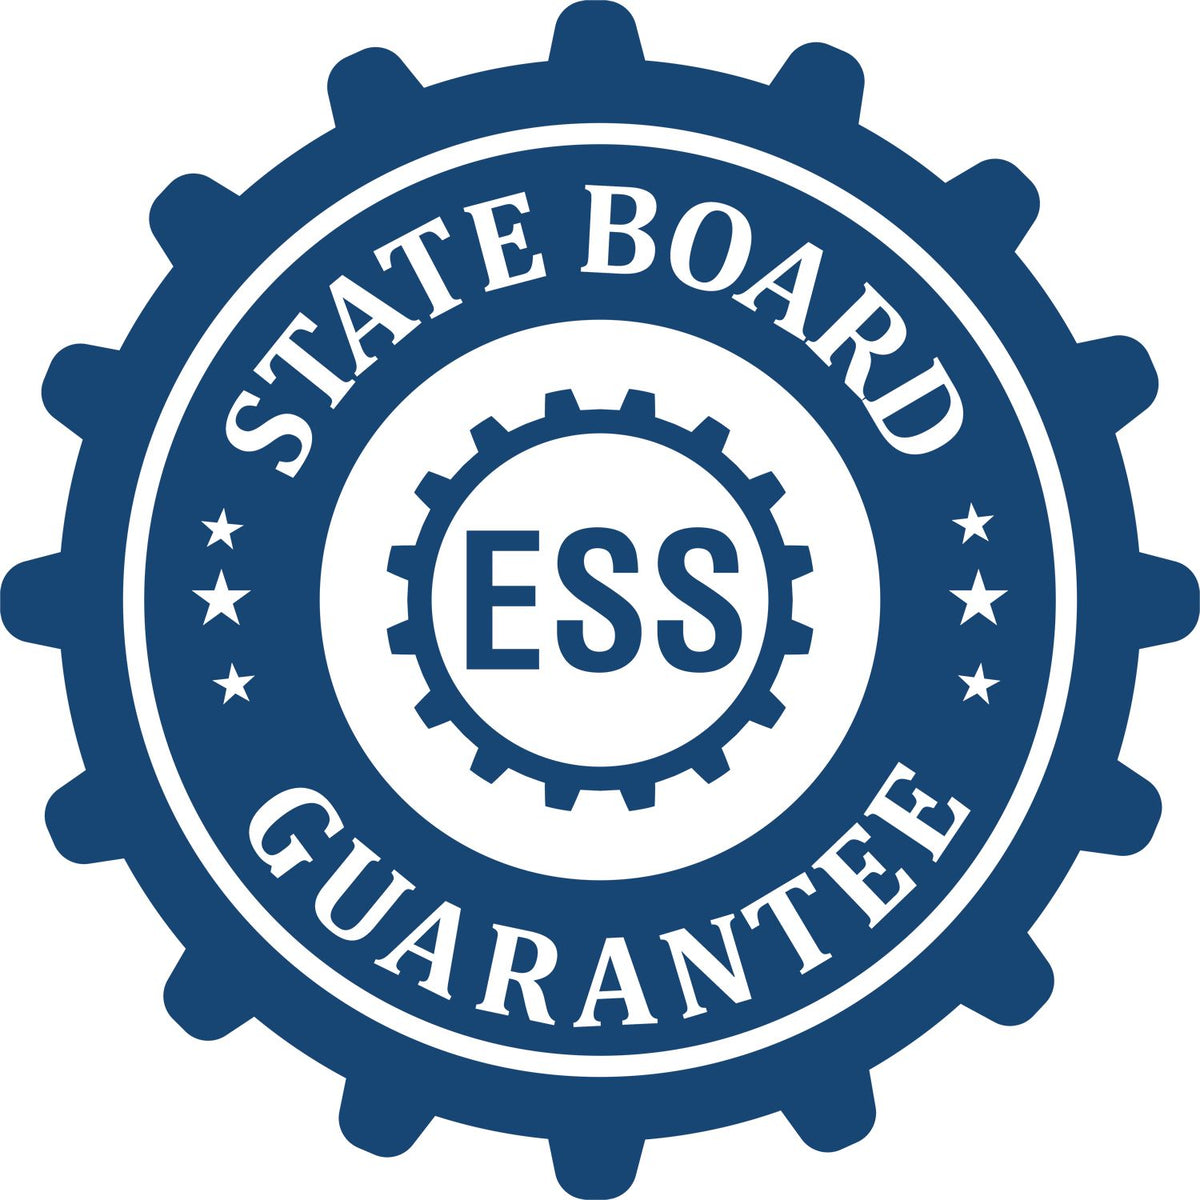 An emblem in a gear shape illustrating a state board guarantee for the Wooden Handle Guam Rectangular Notary Public Stamp product.